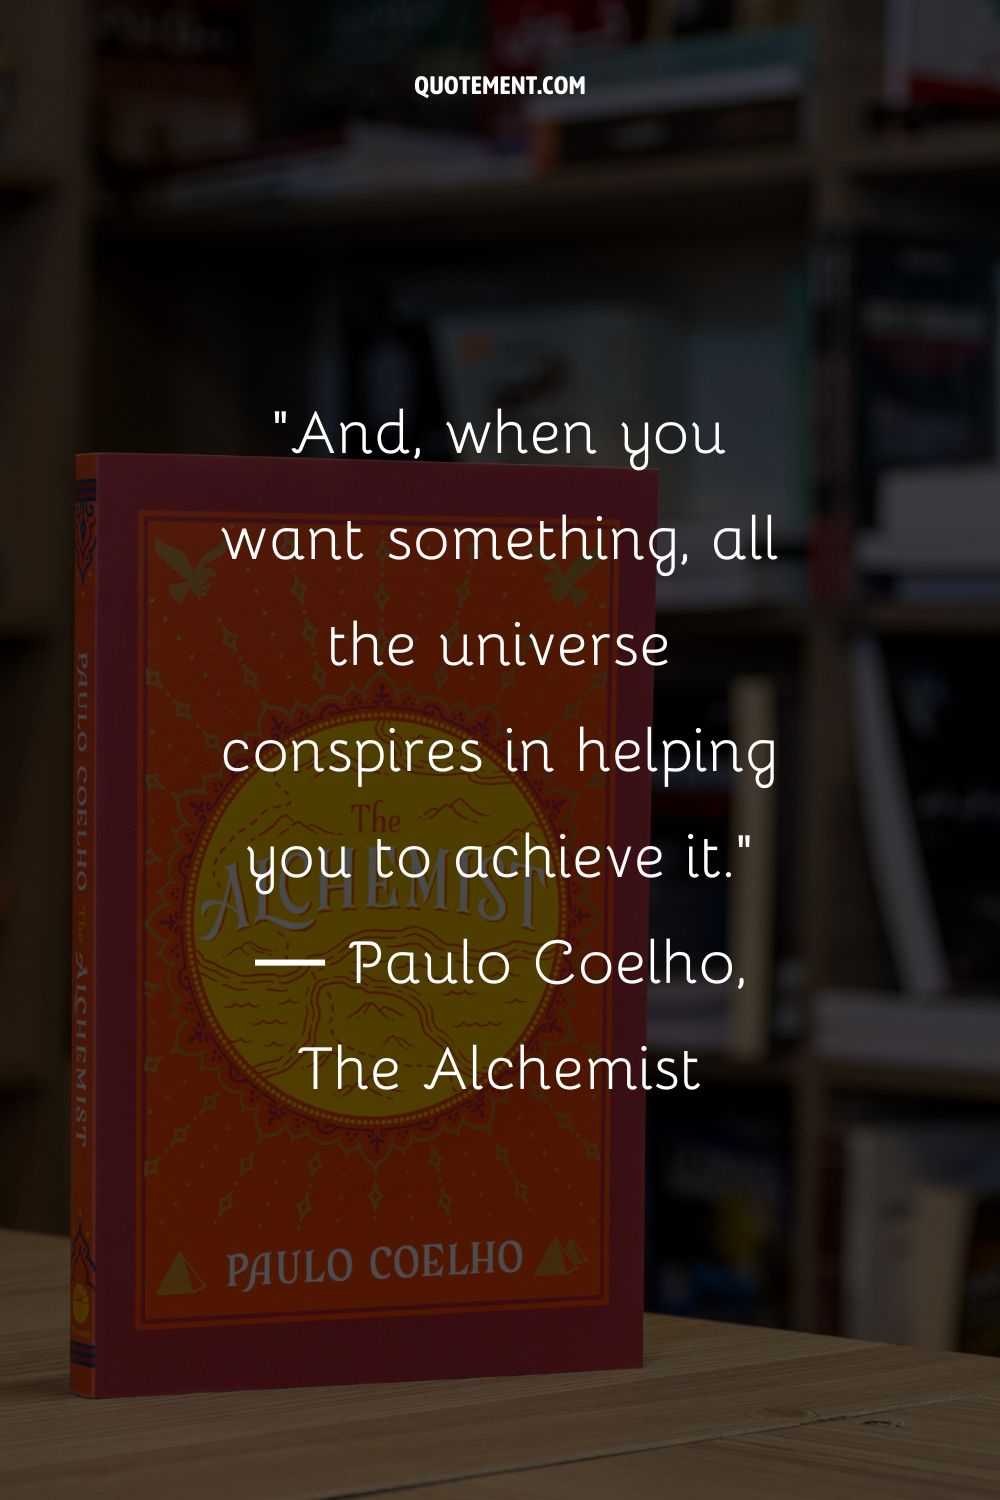 And, when you want something, all the universe conspires in helping you to achieve it.